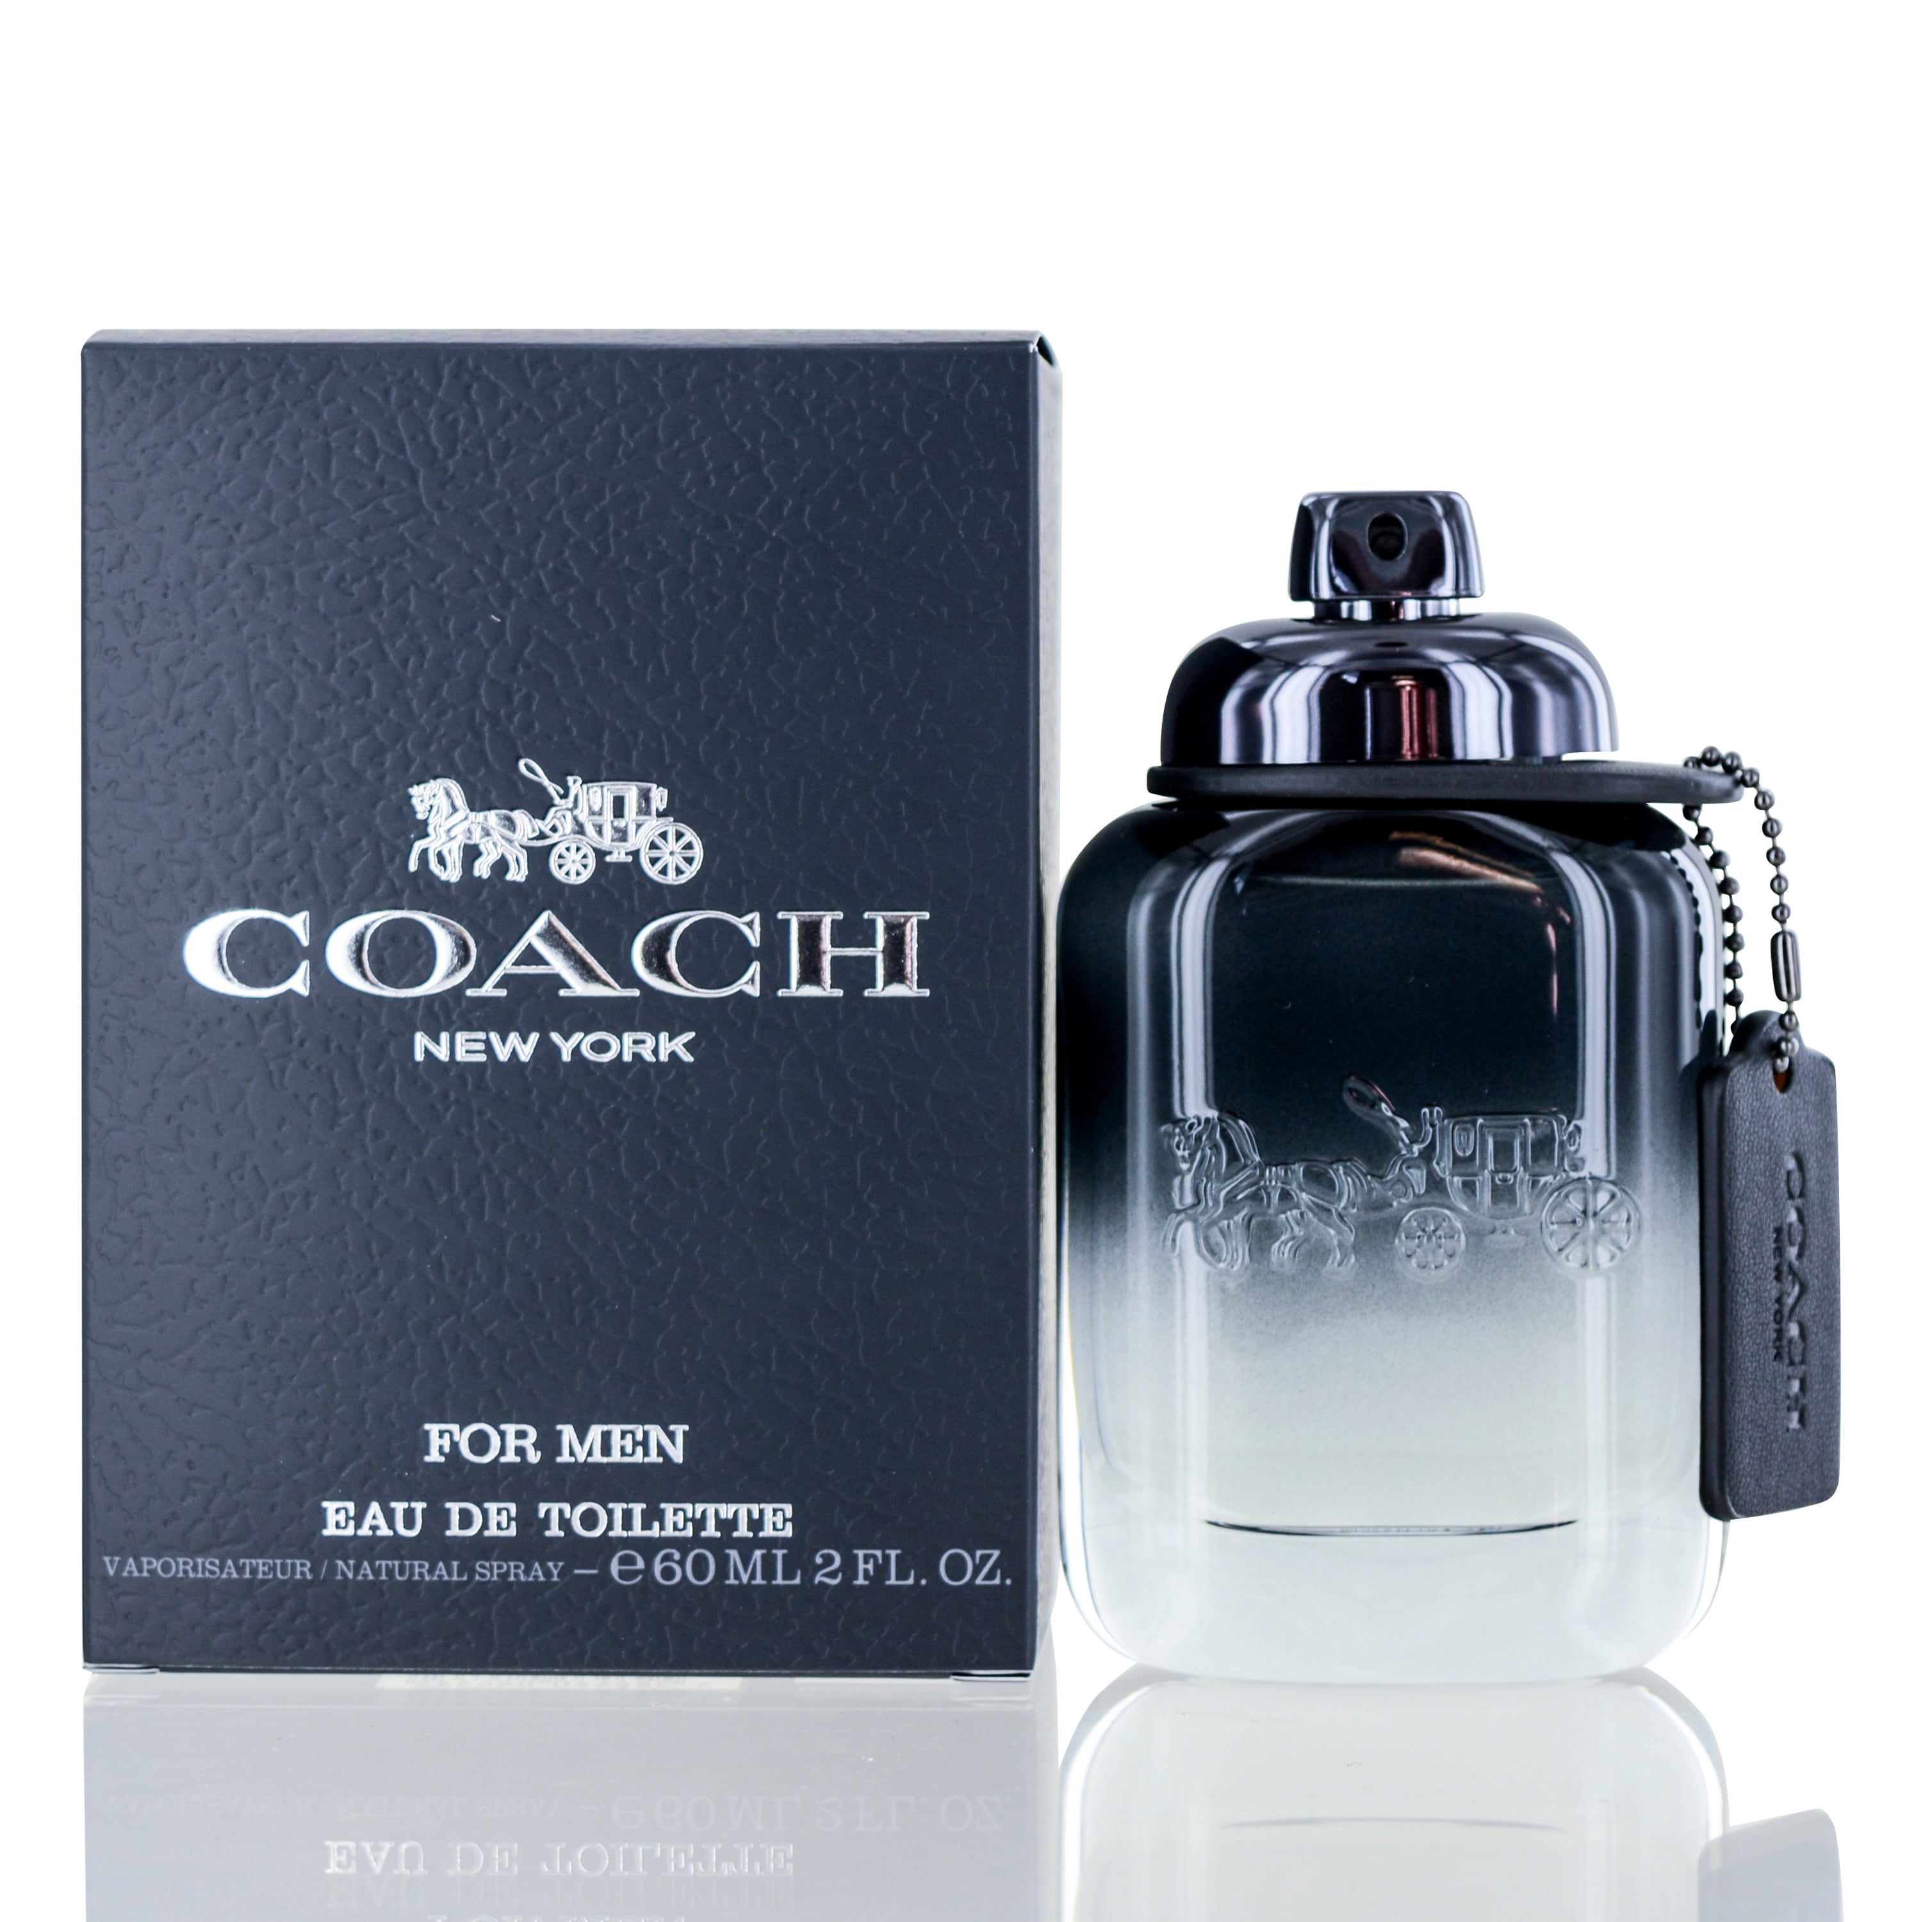 2-oz Coach for Men Cologne on sale for $39.99